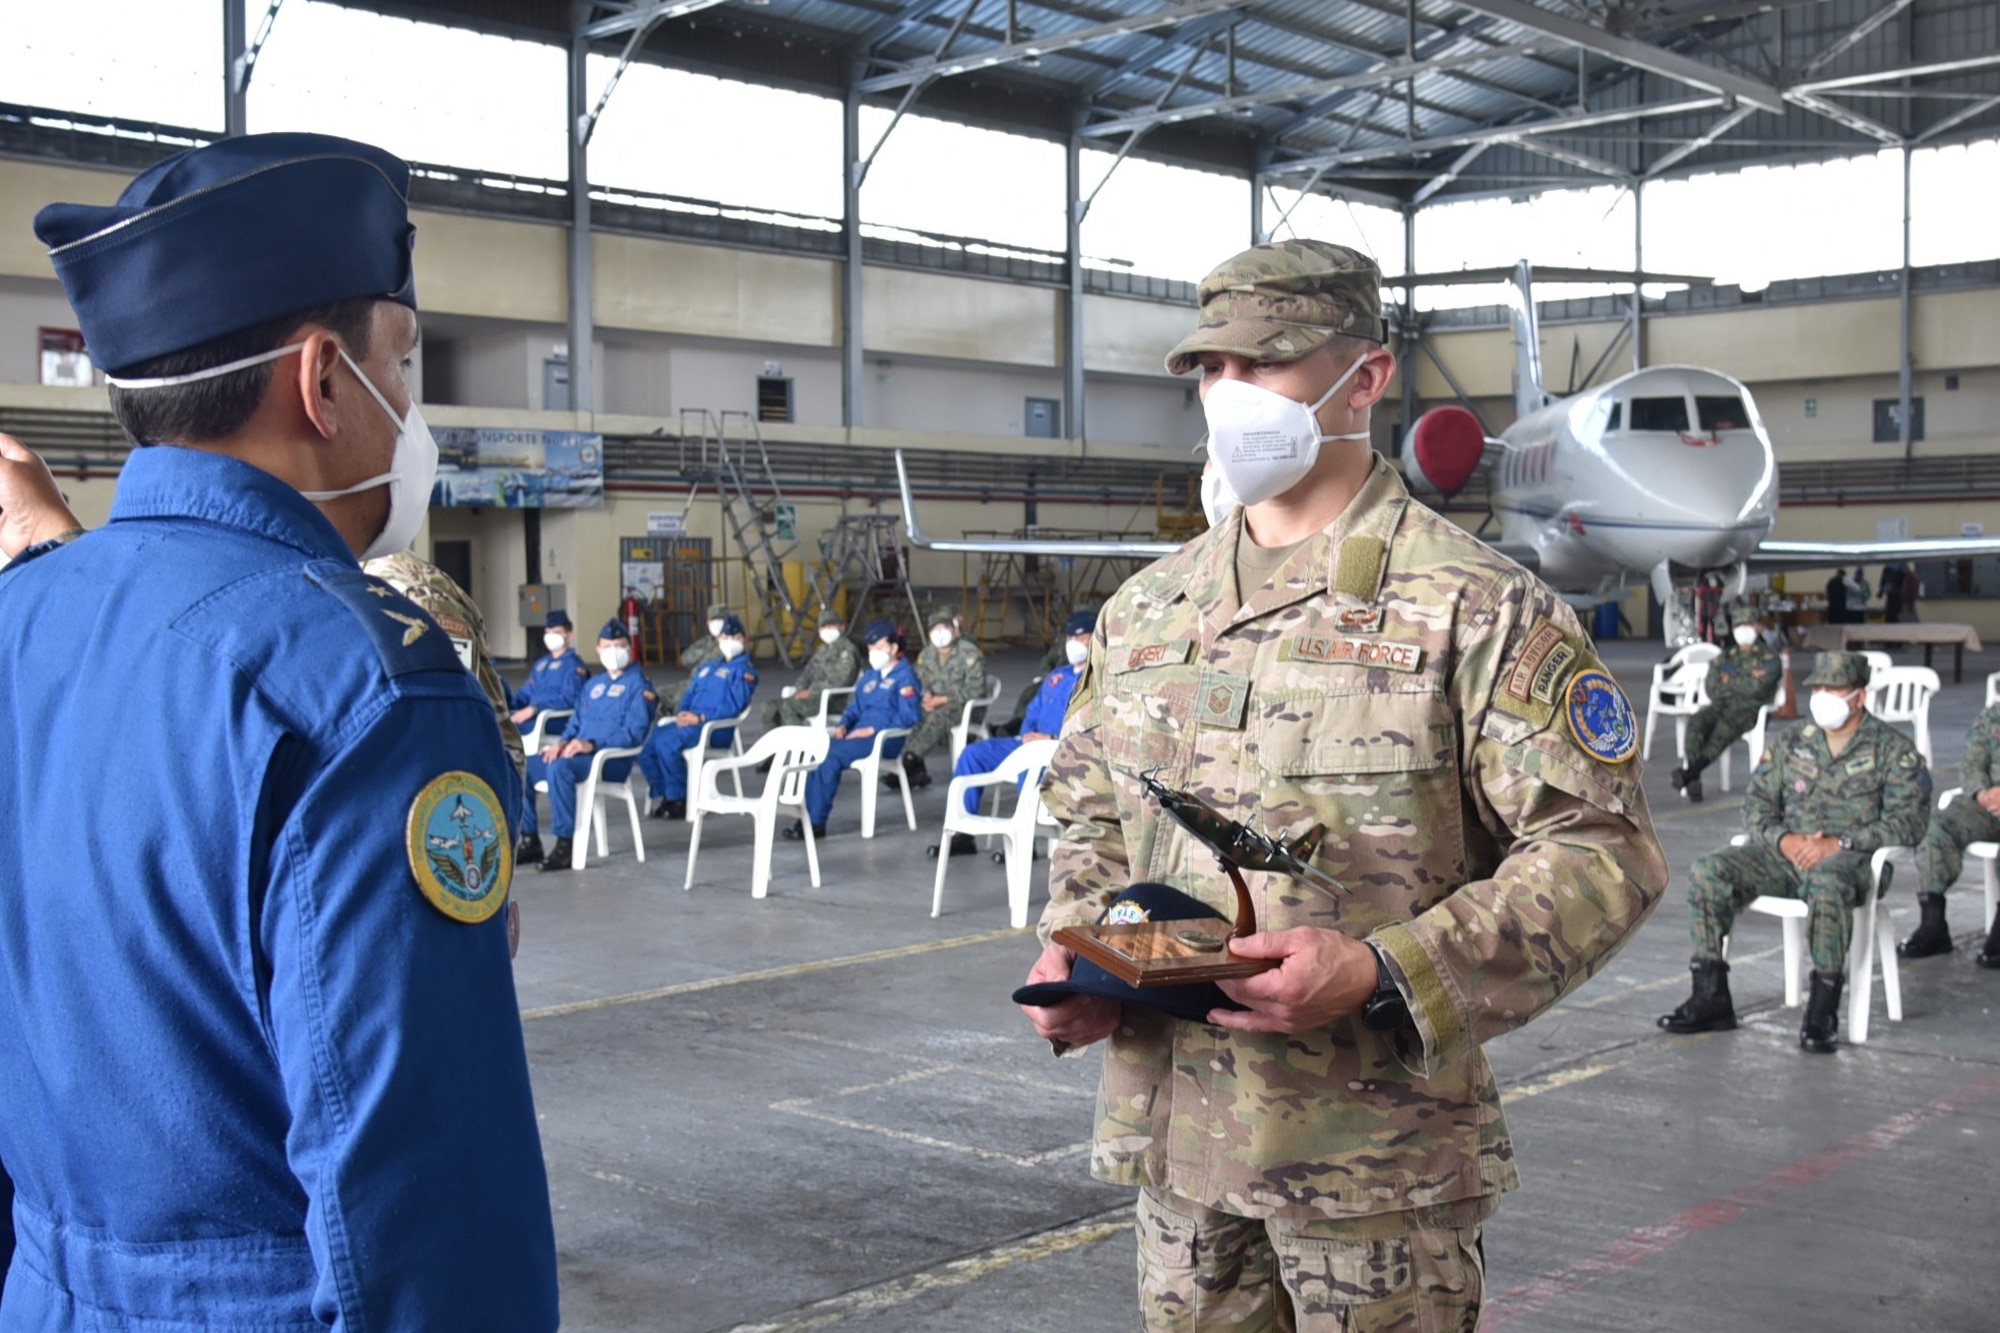 U.S. Air Force Master Sgt. Caleb Dysert, 571st Mobility Support Advisory Squadron team sergeant, receives a model L-100 aircraft and a Fuerza Aérea Ecuatoriana, ball cap as a gift of appreciation from FAE Mayor Franklin Acosta July 31, 2020, at Cotopaxi Air Force Base in Latacunga, Ecuador. (U.S. Air Force photo by Master Sgt. Freddy Muñoz)